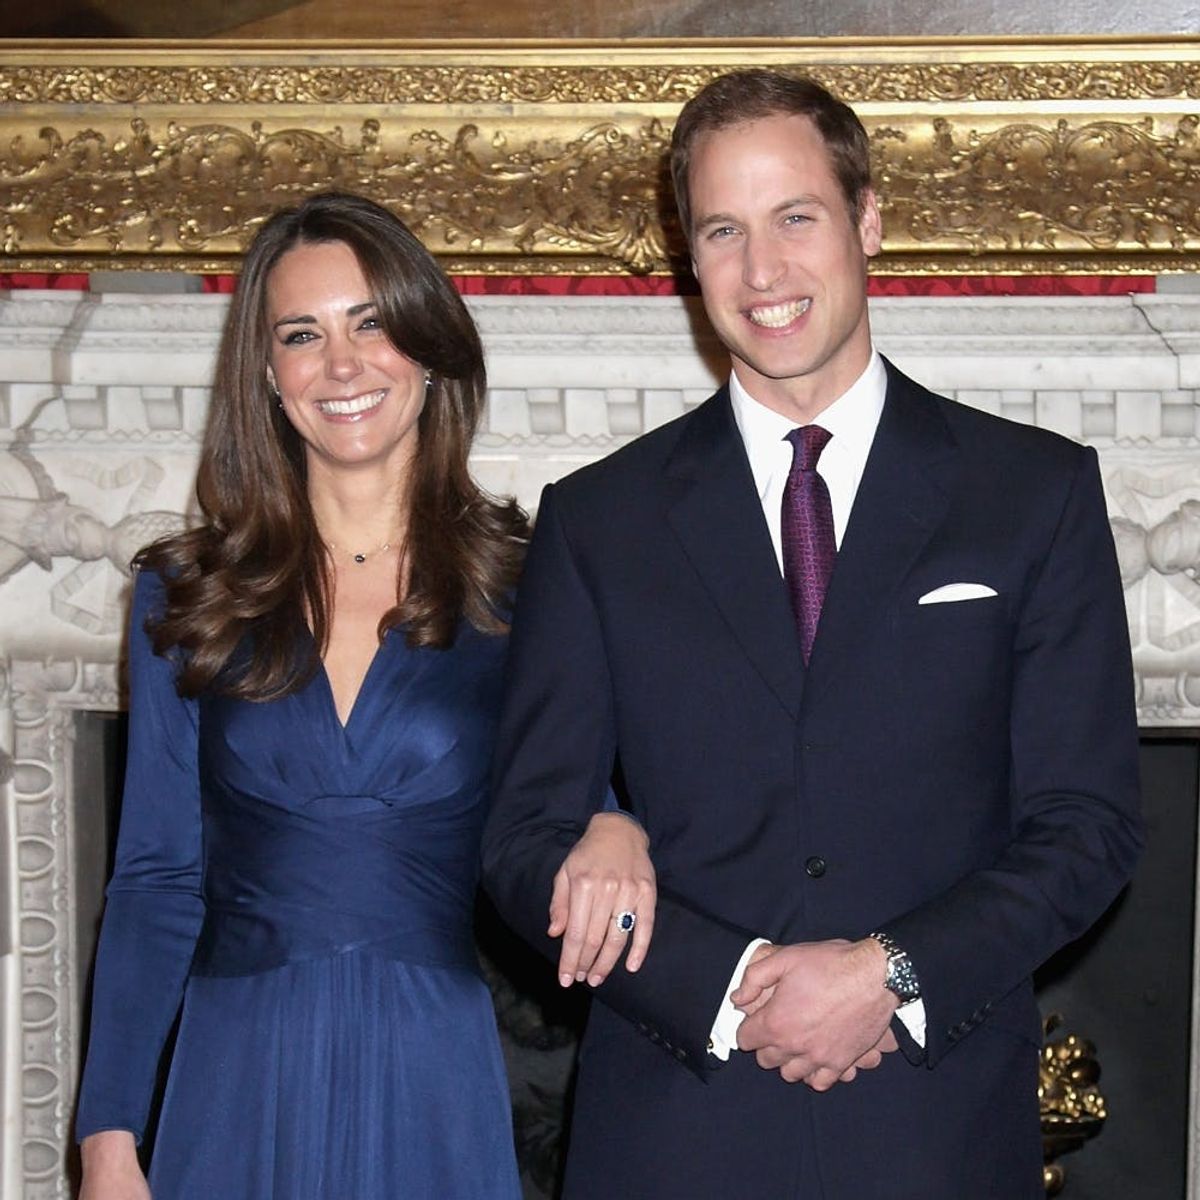 The Designer Behind Kate Middleton’s Engagement Dress Says She Lost Her Biz Because Of It